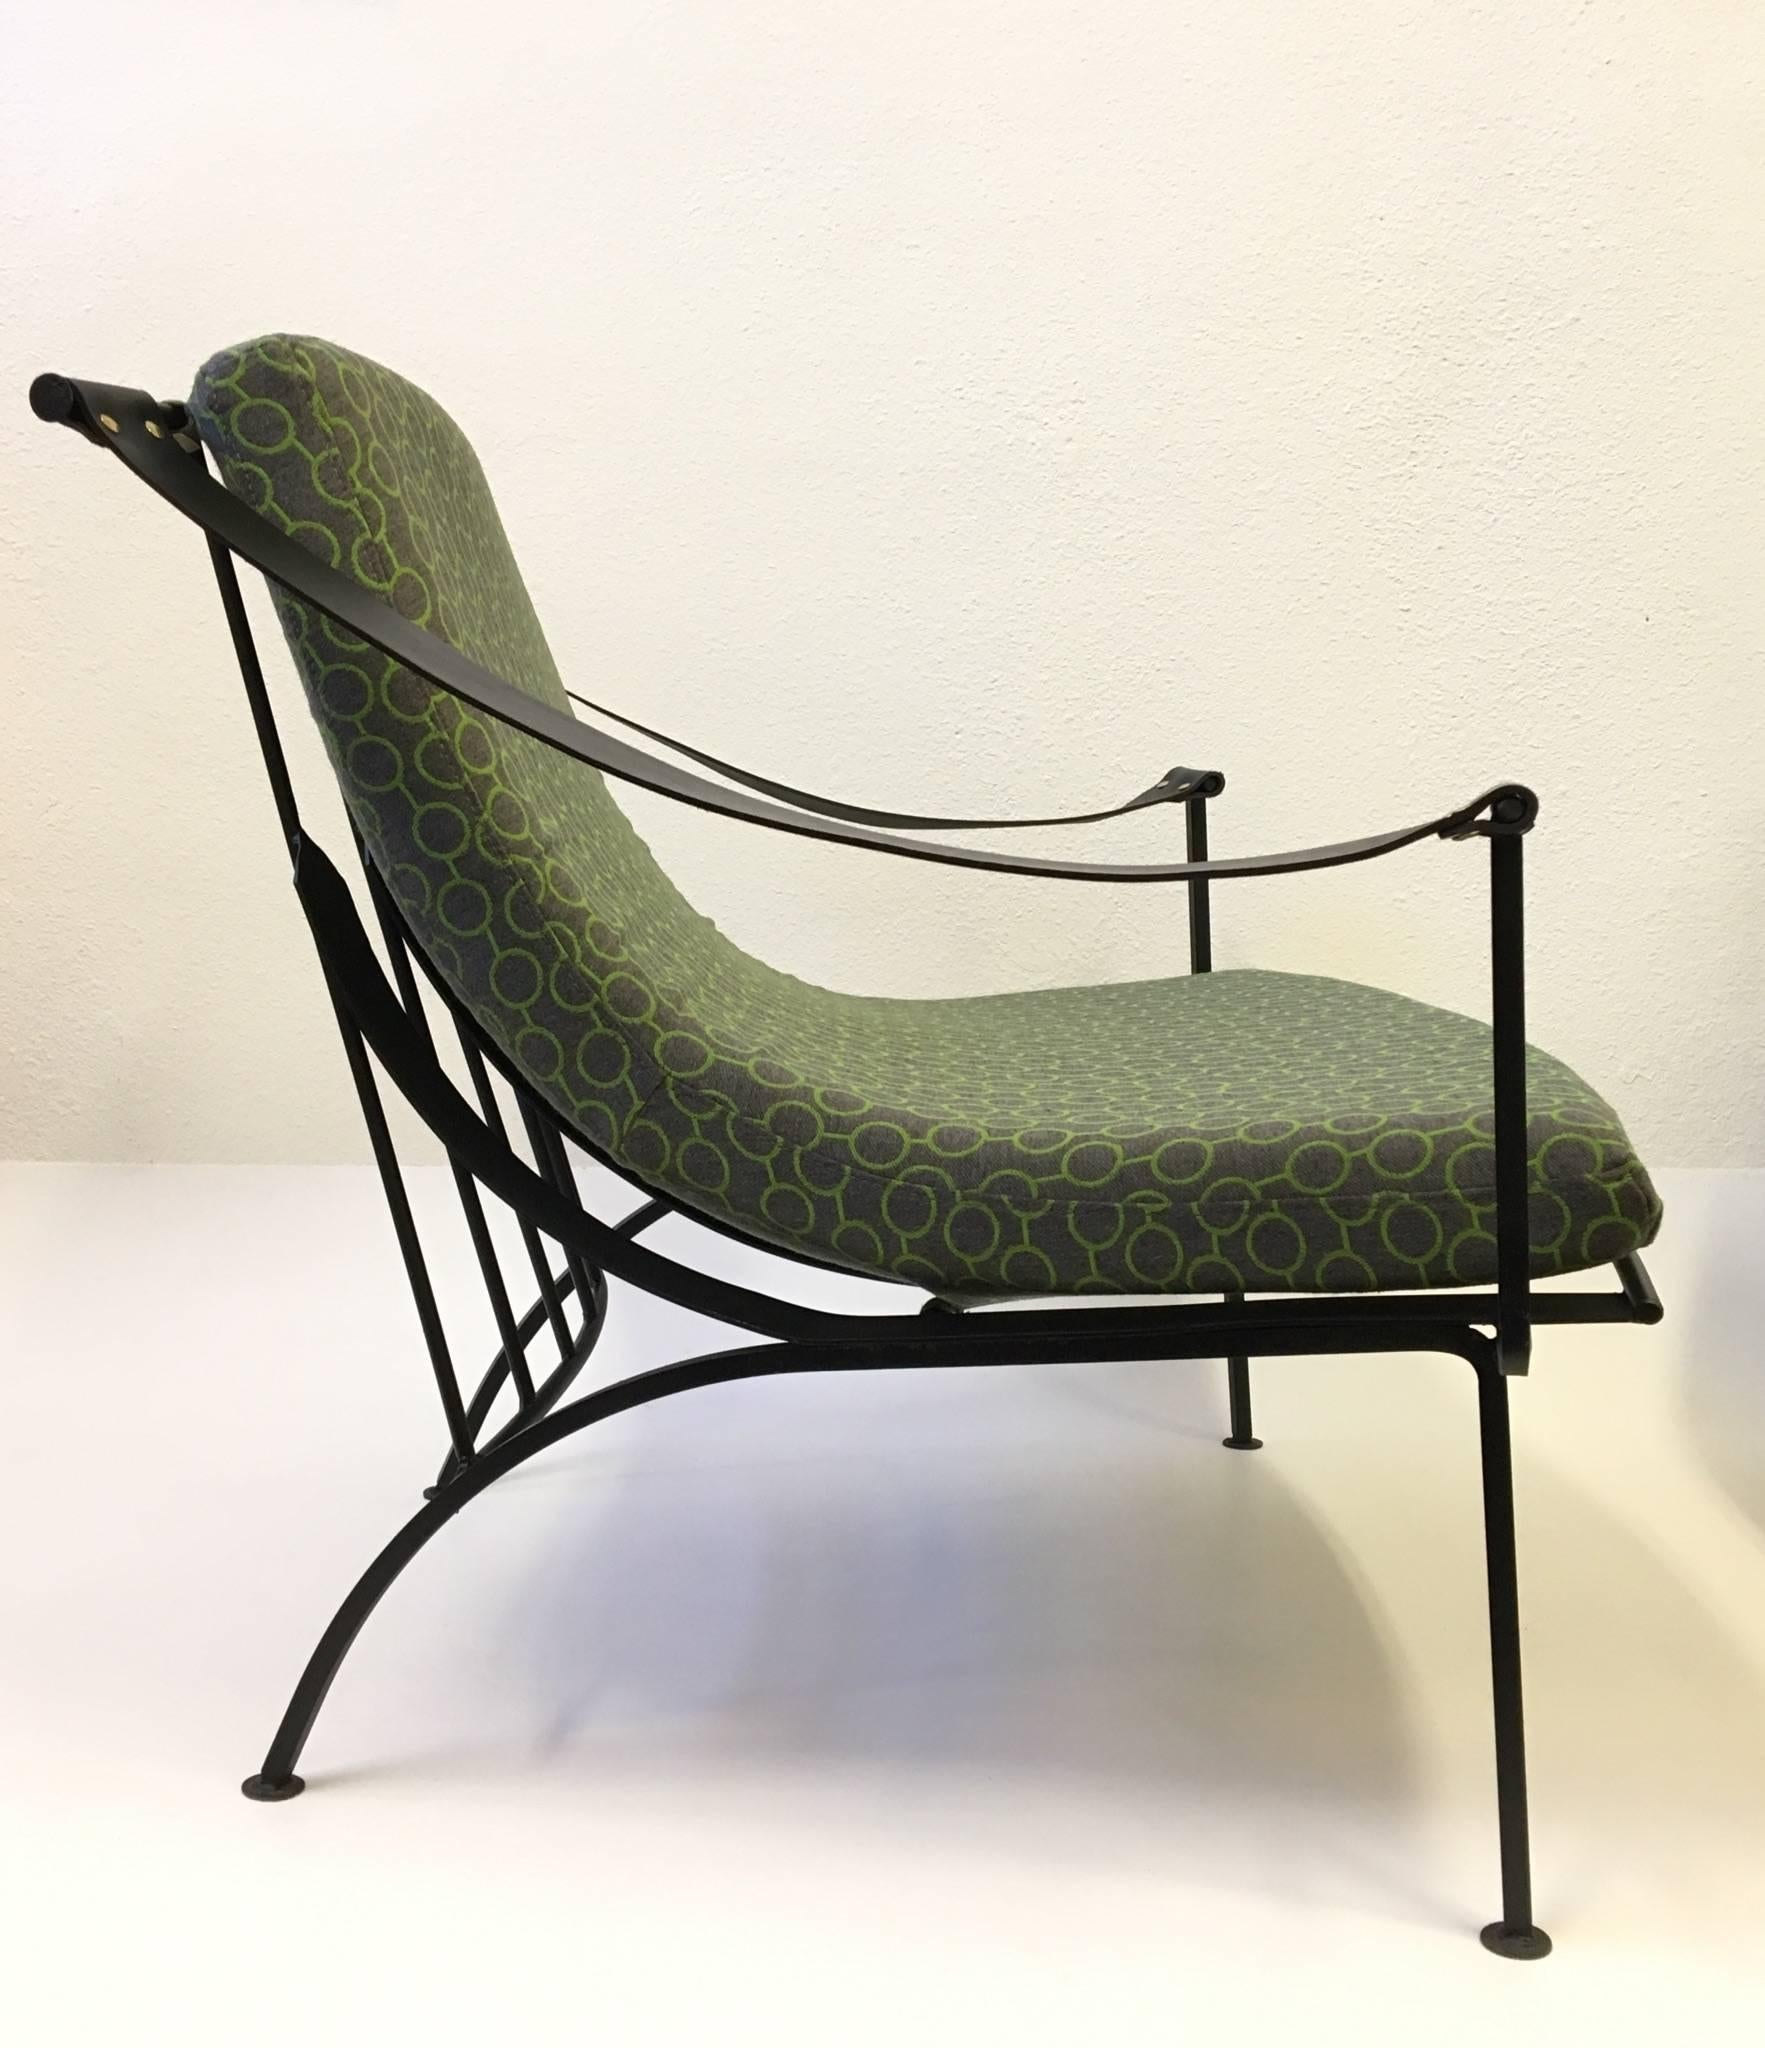 American Pair of Wrought Iron and Fabric Lounge Chairs by Russell Woodard